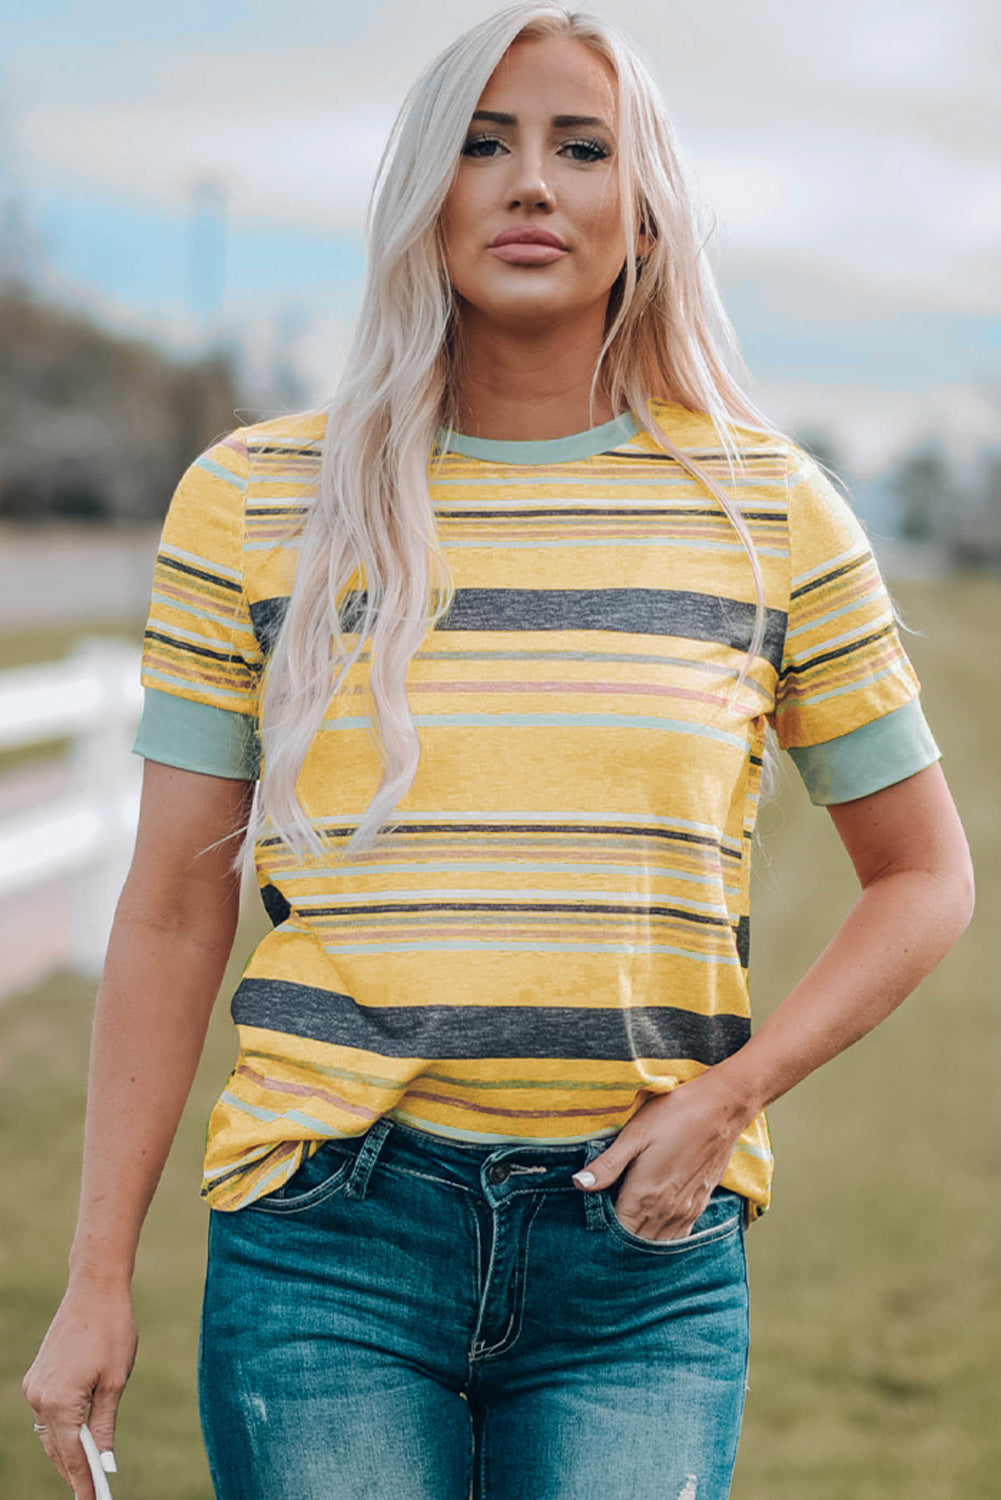 Women's Full Size Multicolored Striped Round Neck Tee Shirt